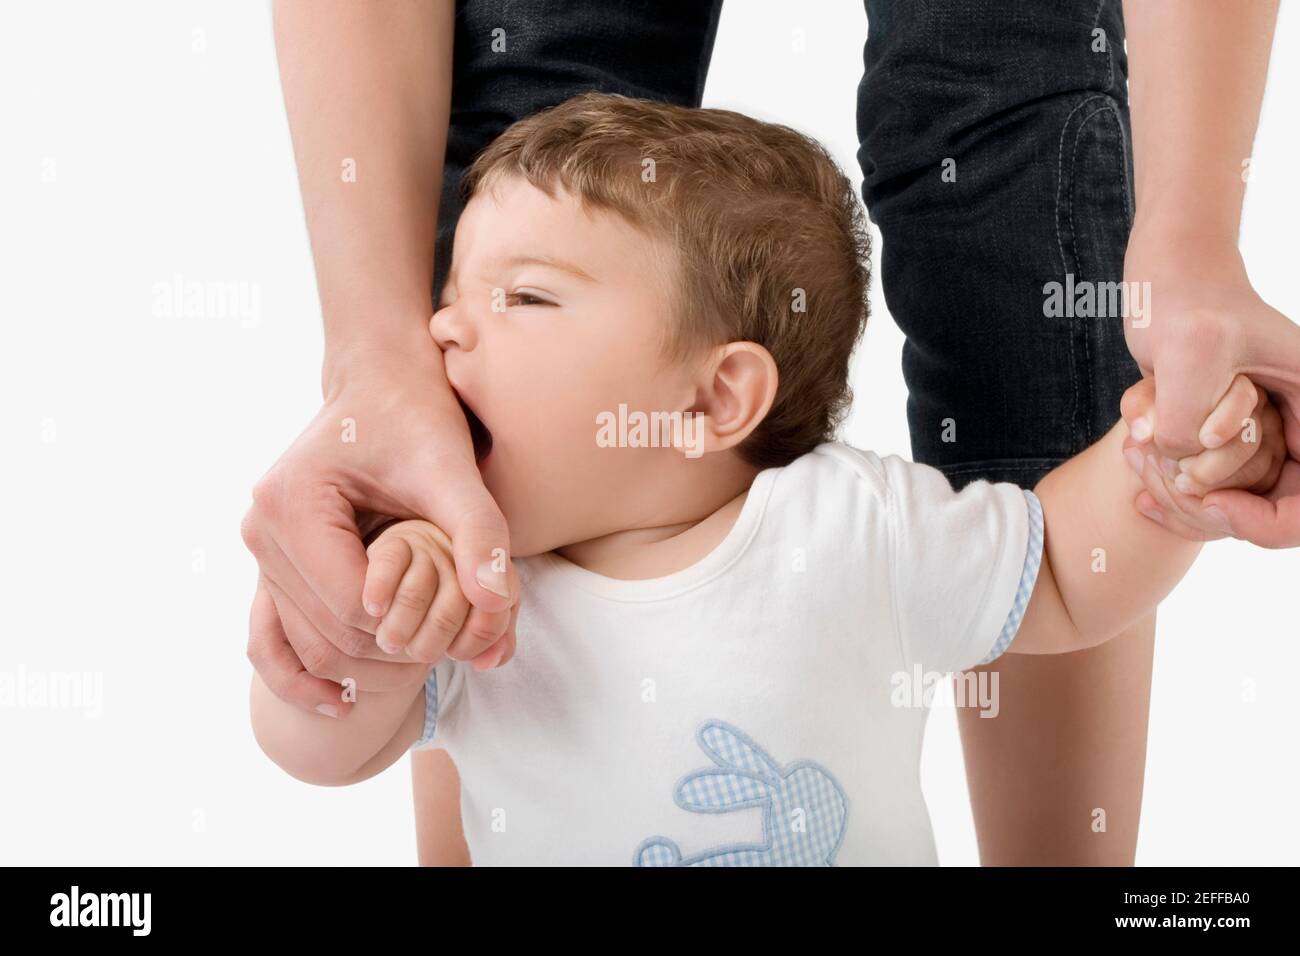 Low section view of a woman holding her babyÅ½s hands Stock Photo